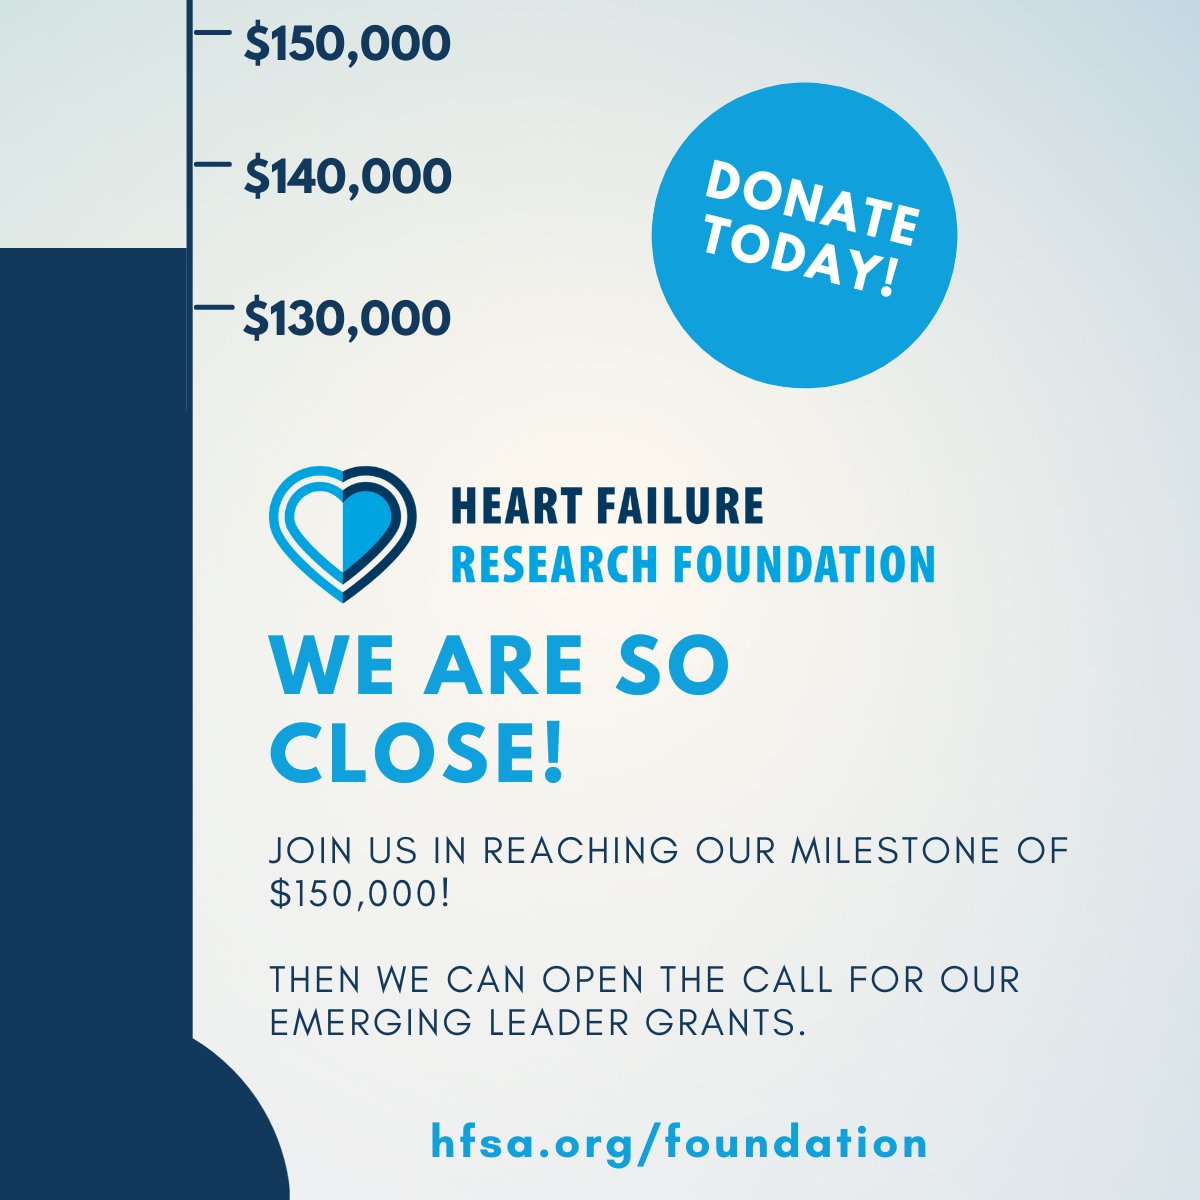 Our goal this spring is to hit the milestone of $150,000 so we can open our call for applicants to our Emerging Leader Grants. So far, our generous community has responded with $894 in gifts. Help us hit this important milestone! Give now: hfsa.org/foundation